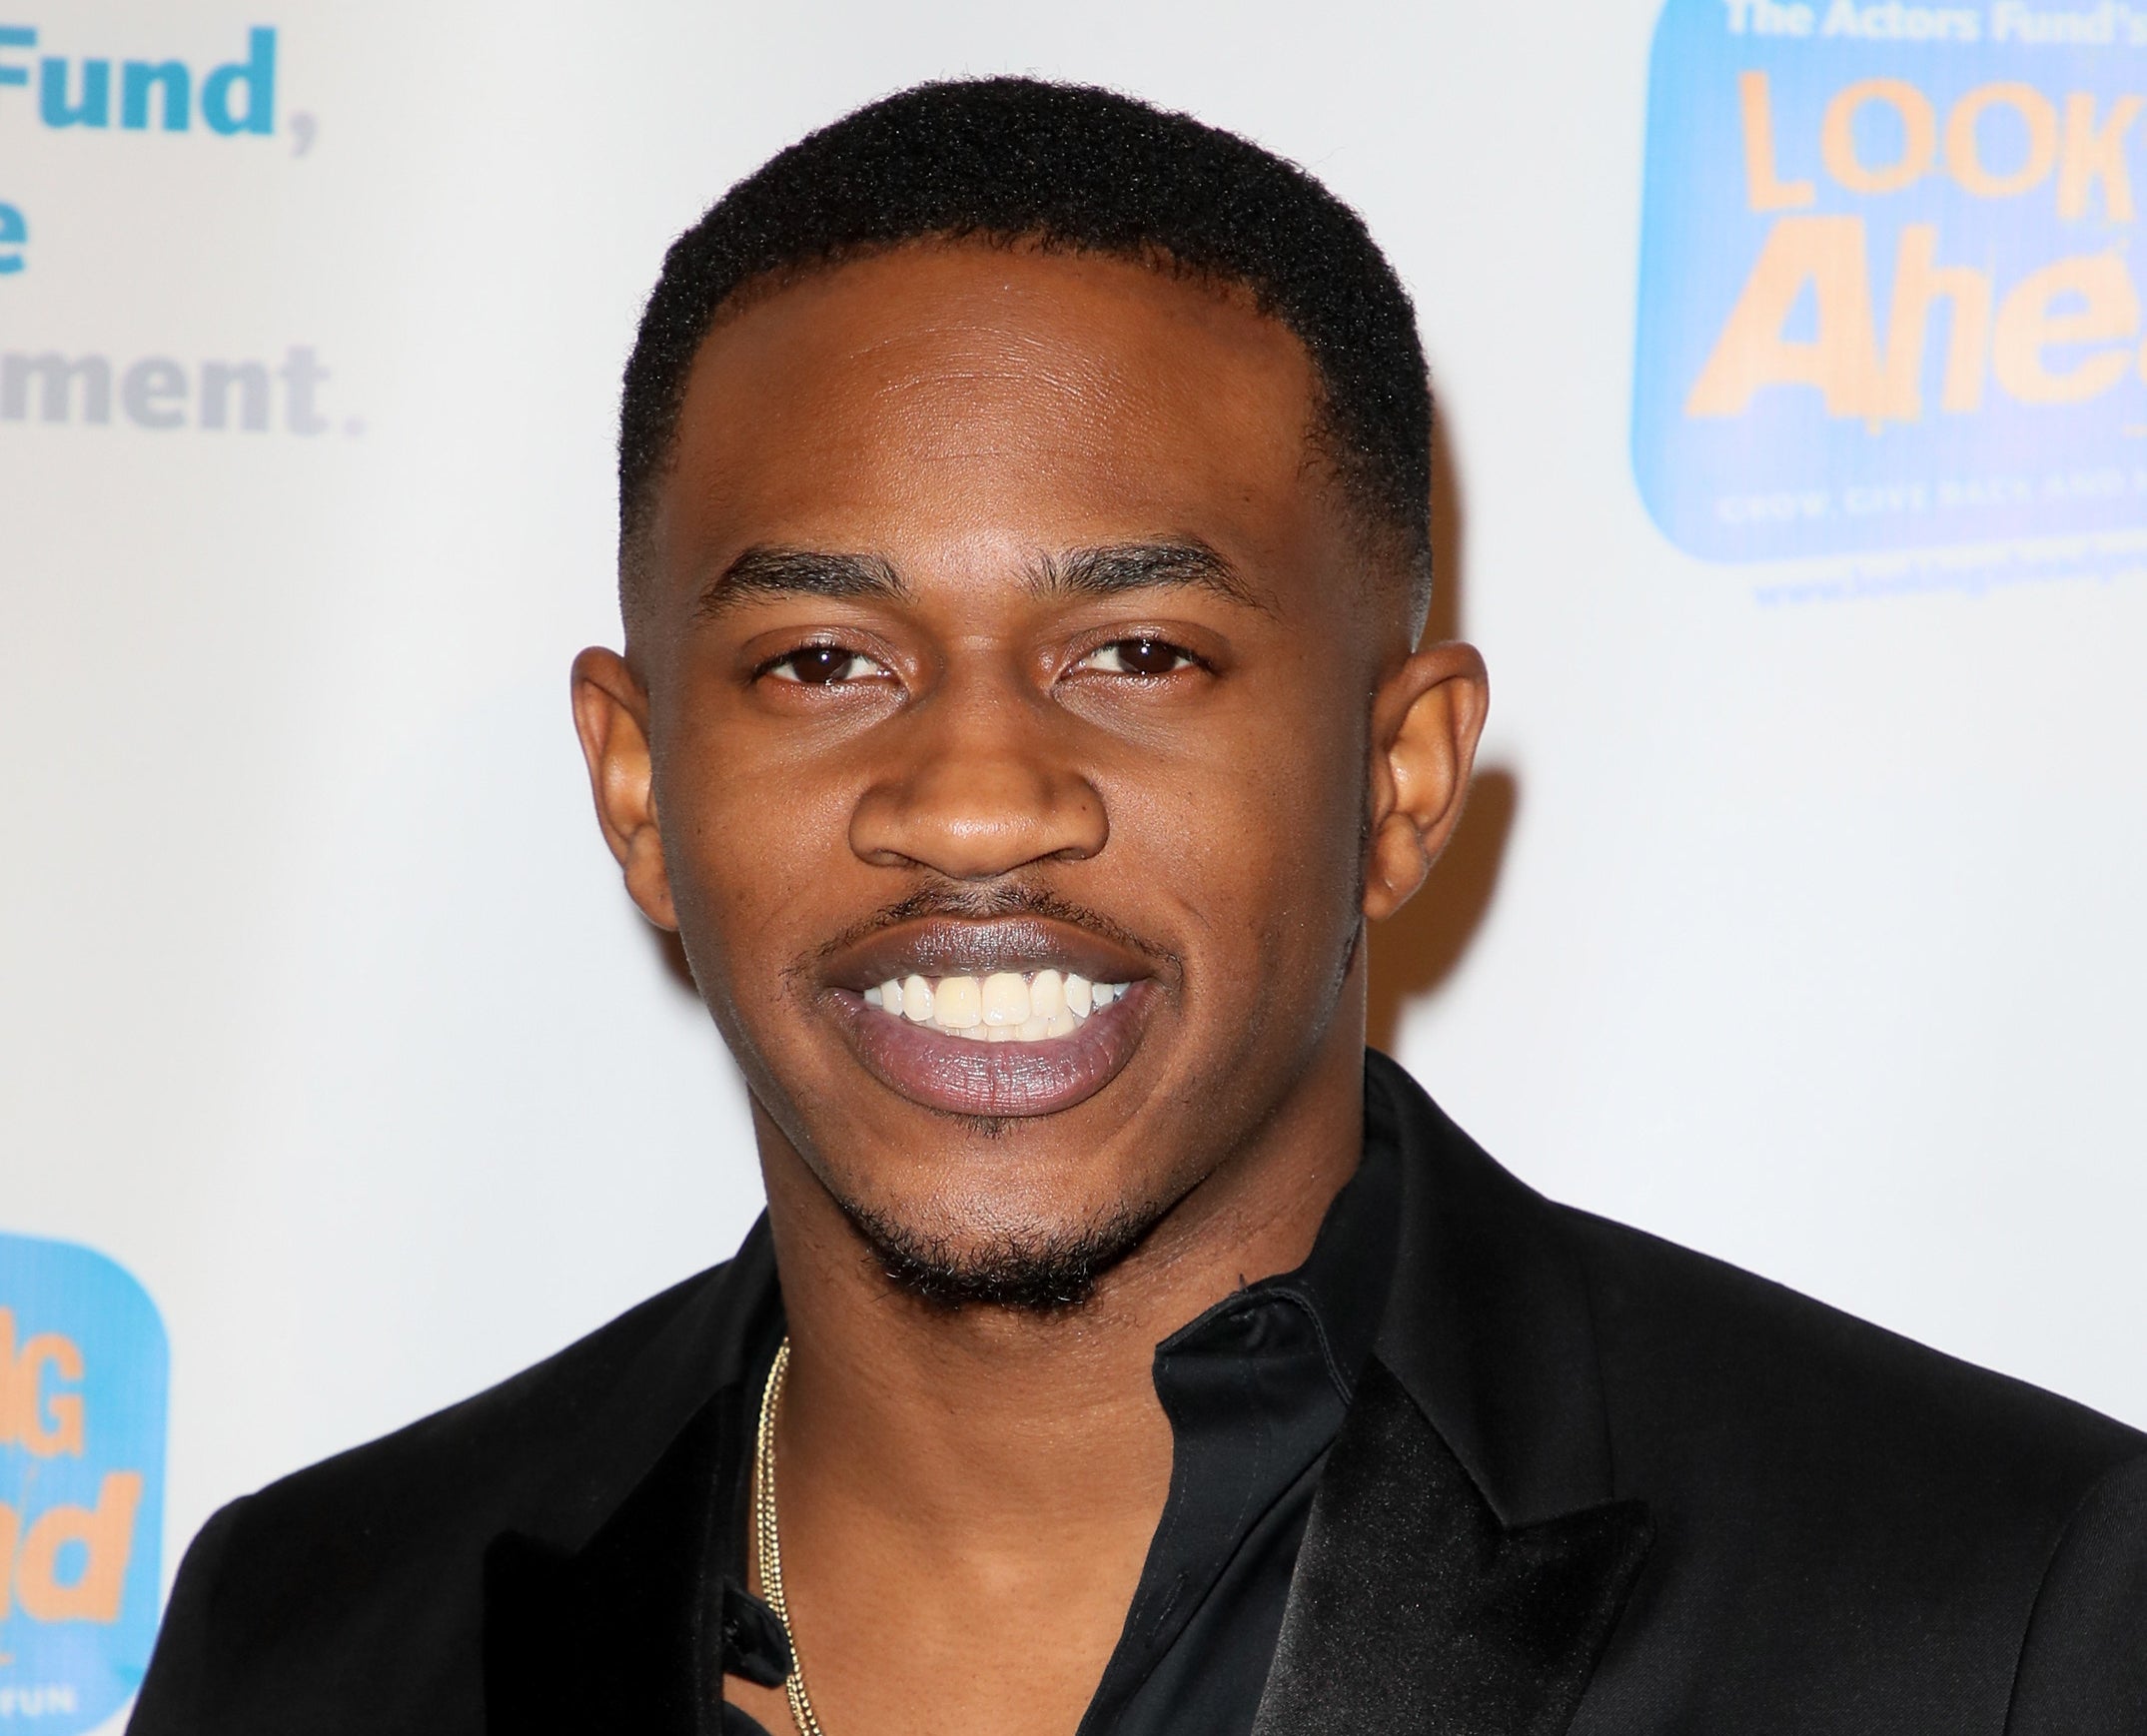 Malcolm David Kelley smiles at red carpet event